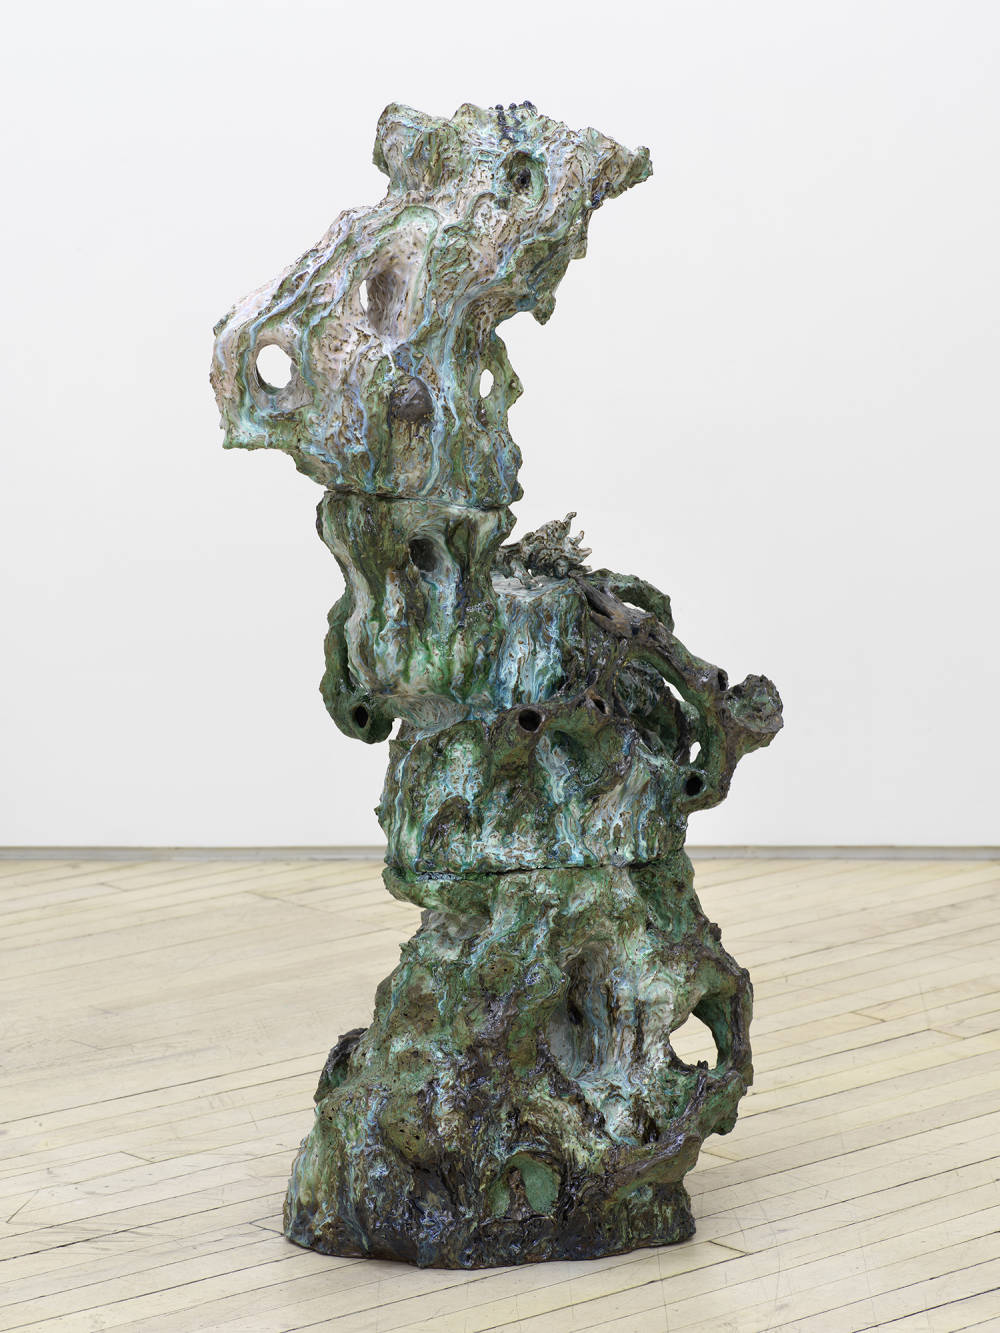 A freestanding, abstract ceramic sculpture resembling a figure merging from a landscape.